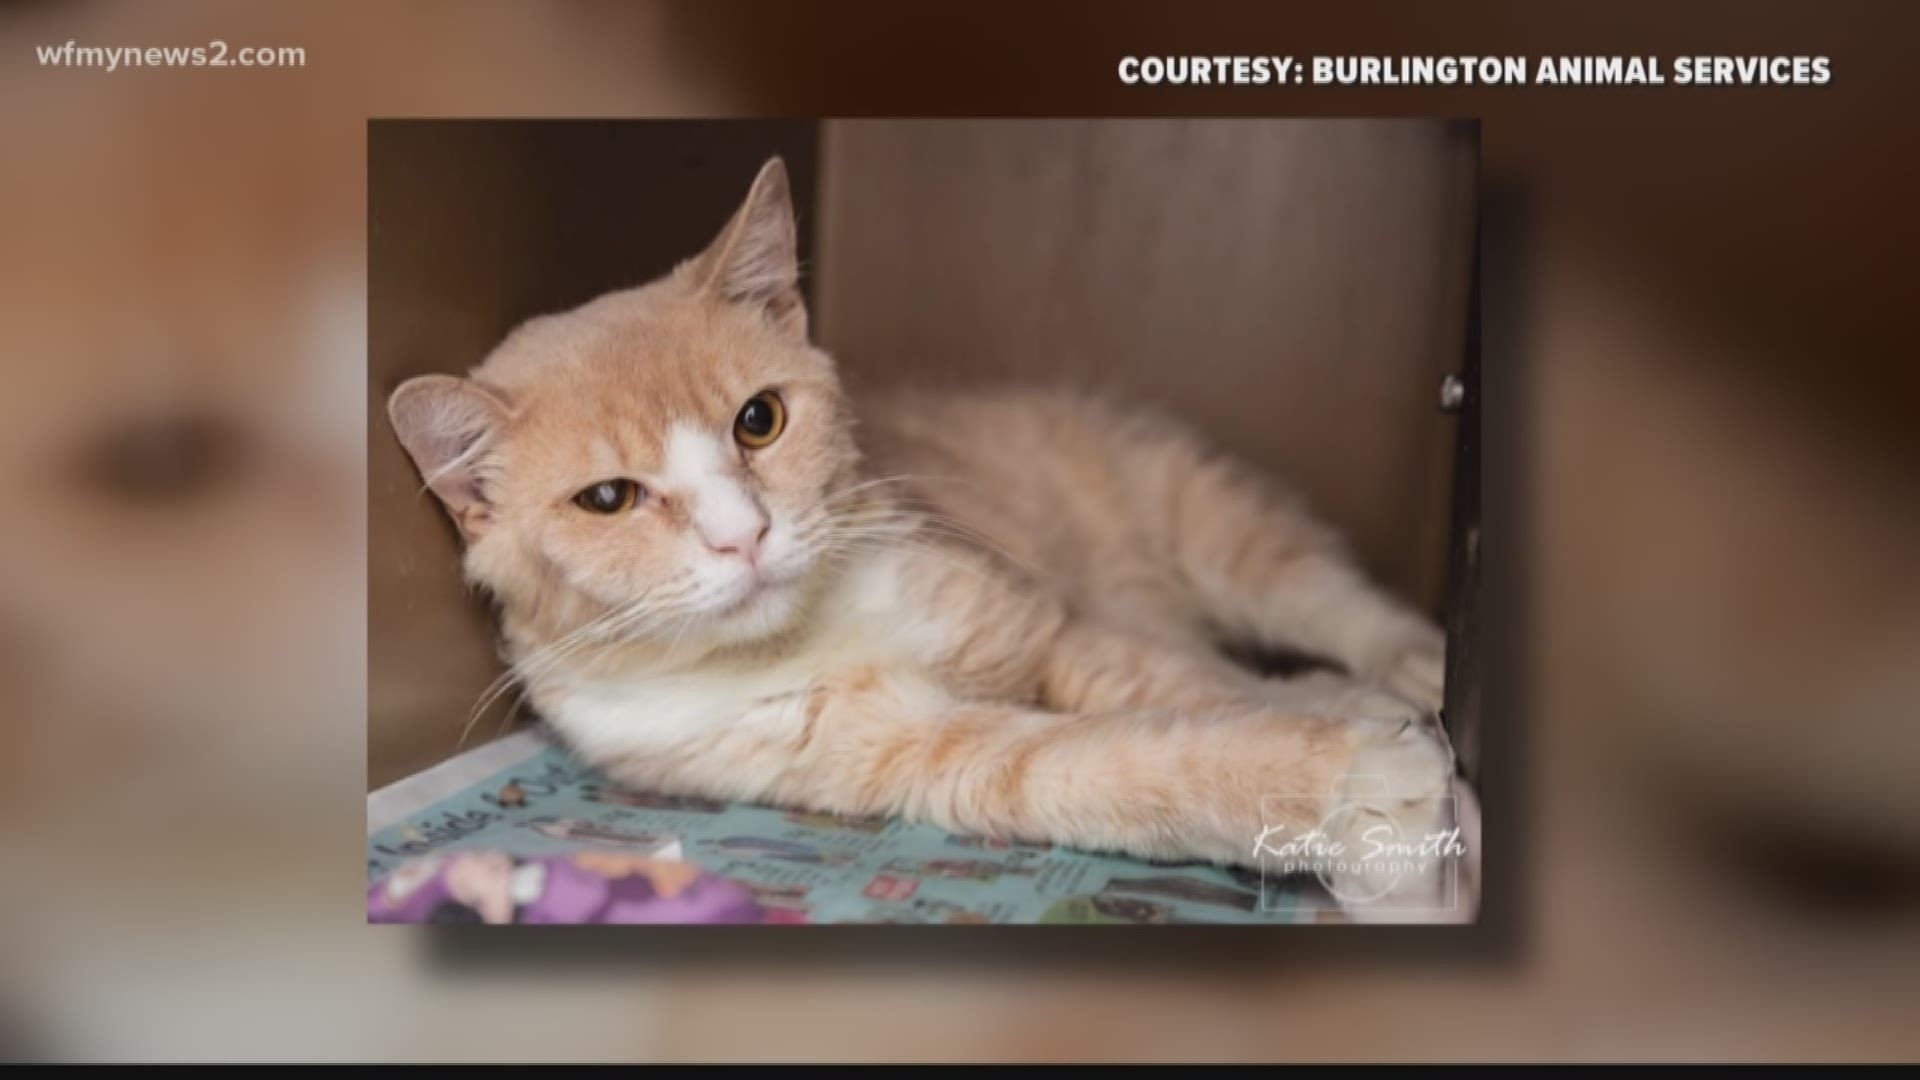 Meet Nutterbutter, a very handsome 5-year-old boy who is looking for a new permanent address to call his own! Come check him out at Burlington Animal Services.